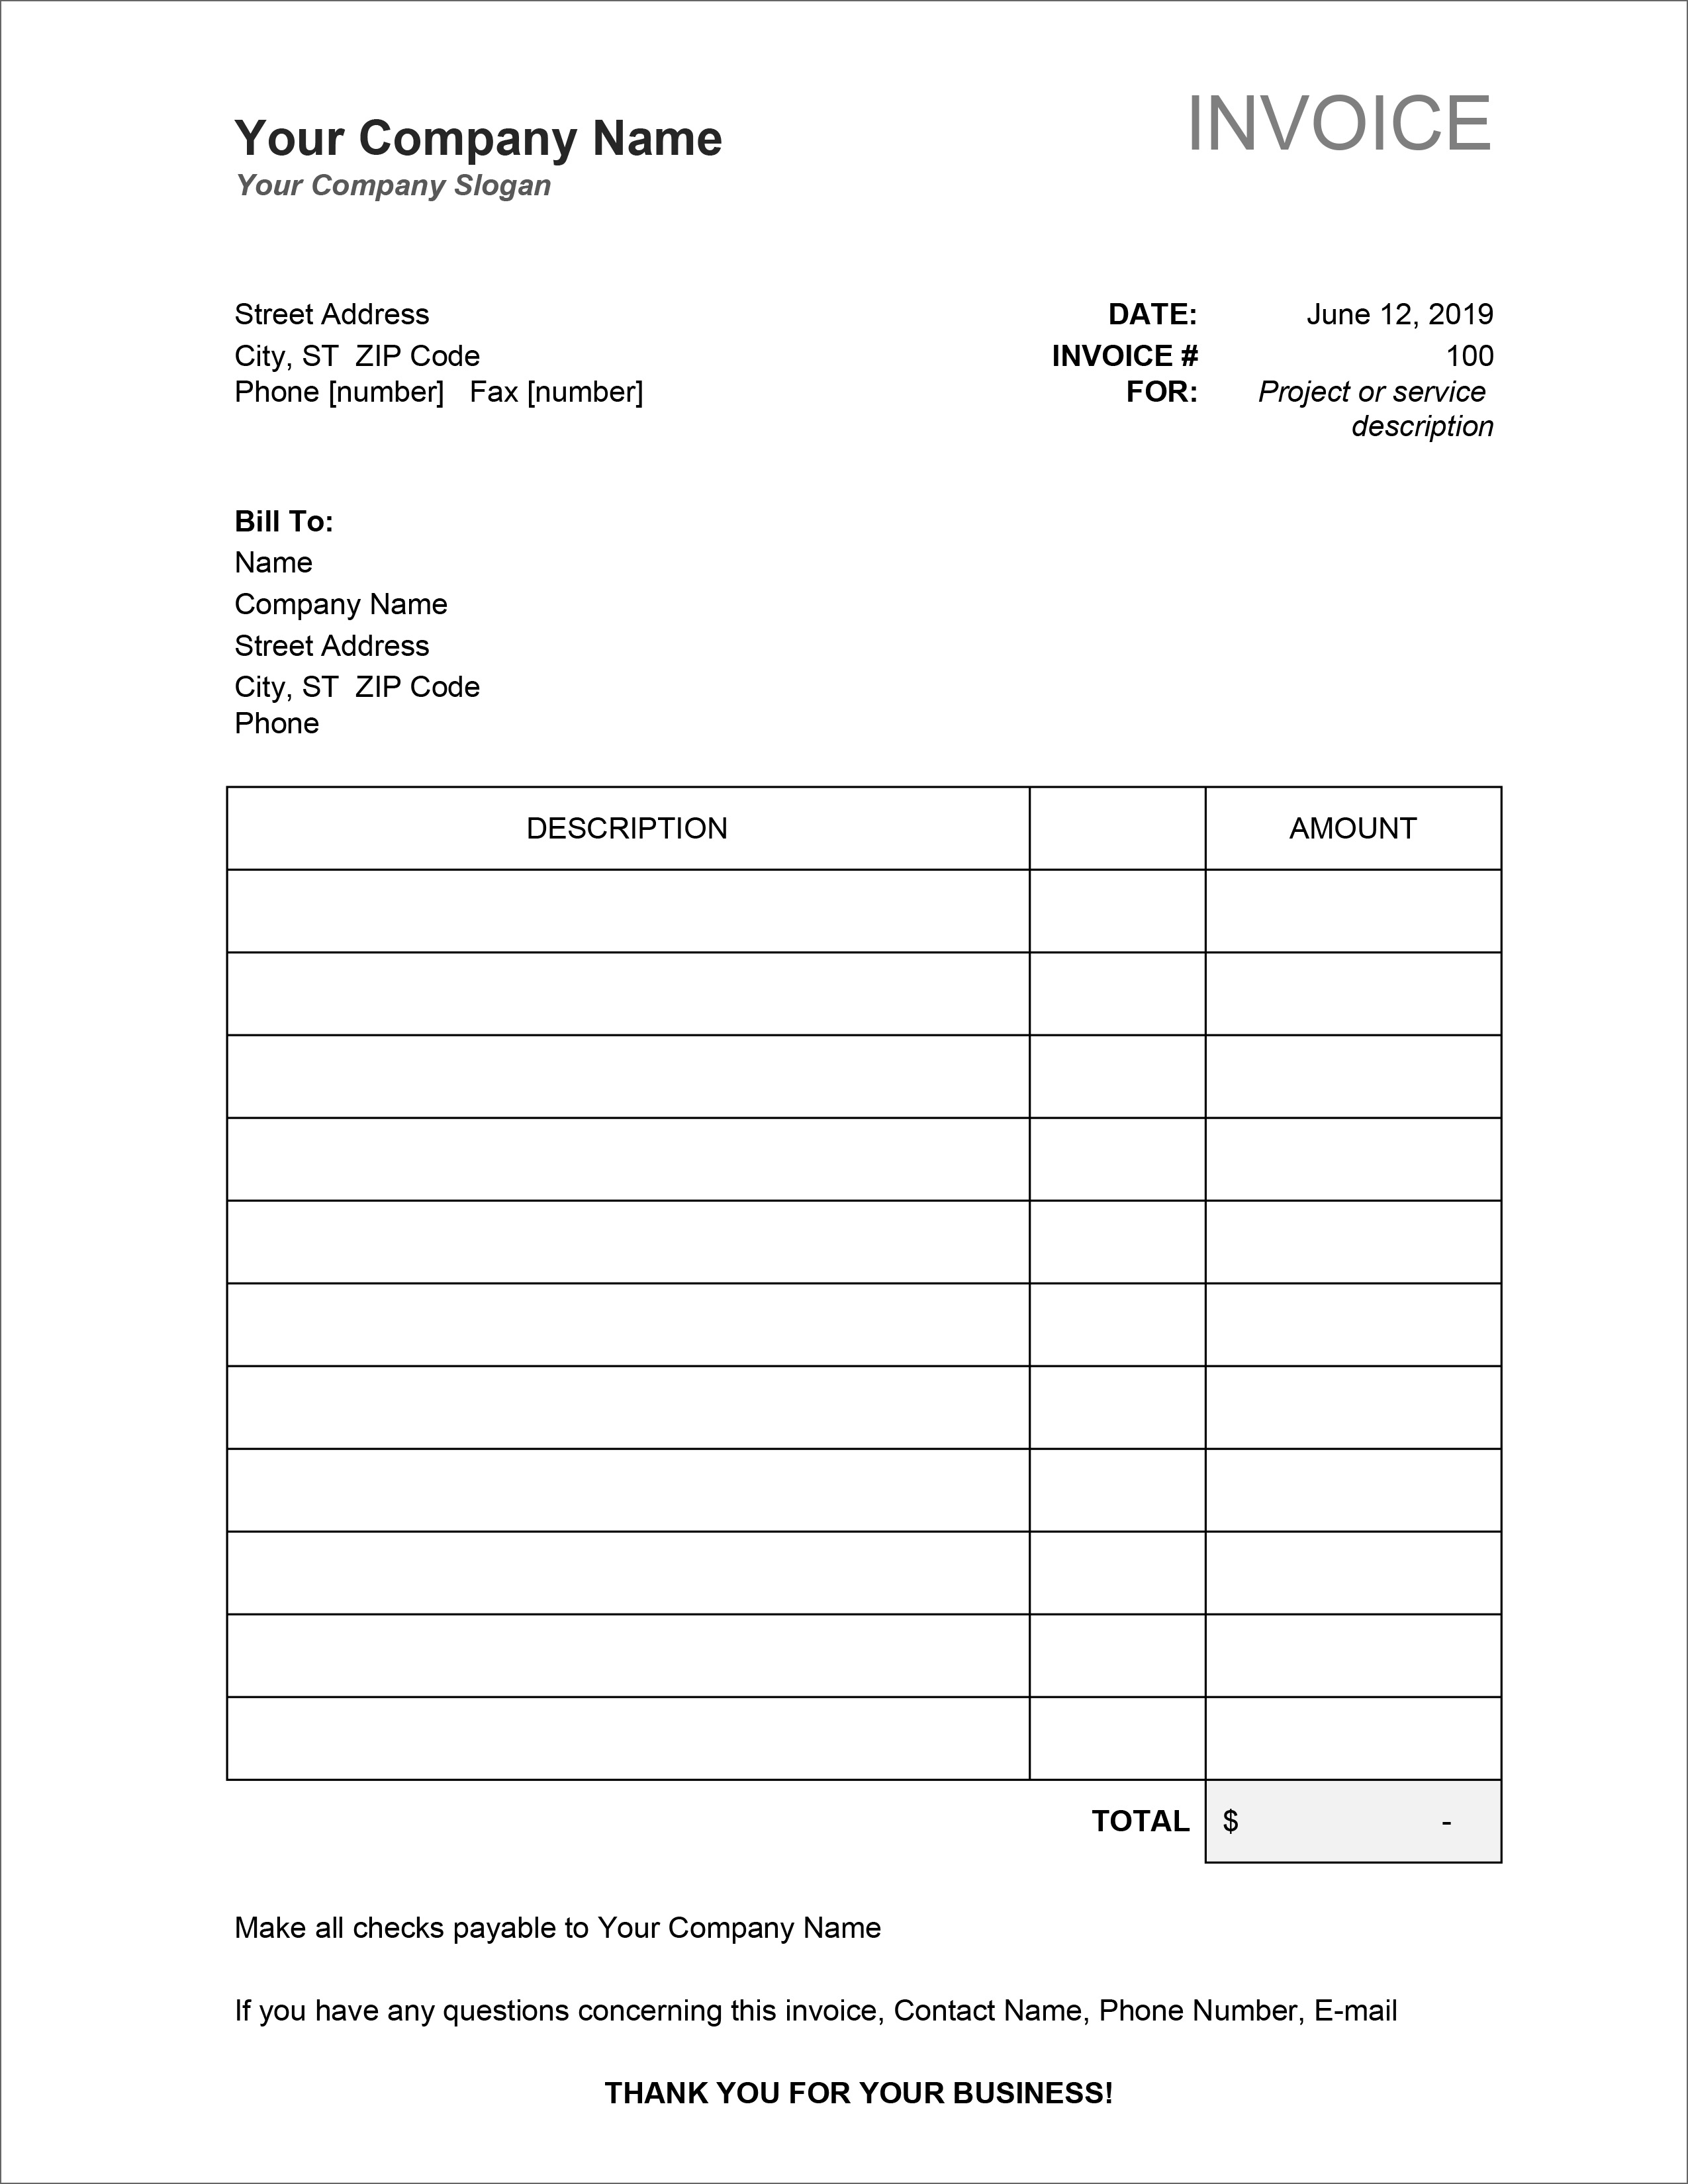 Sample Invoice Template Free Download Invoice Template Ideas